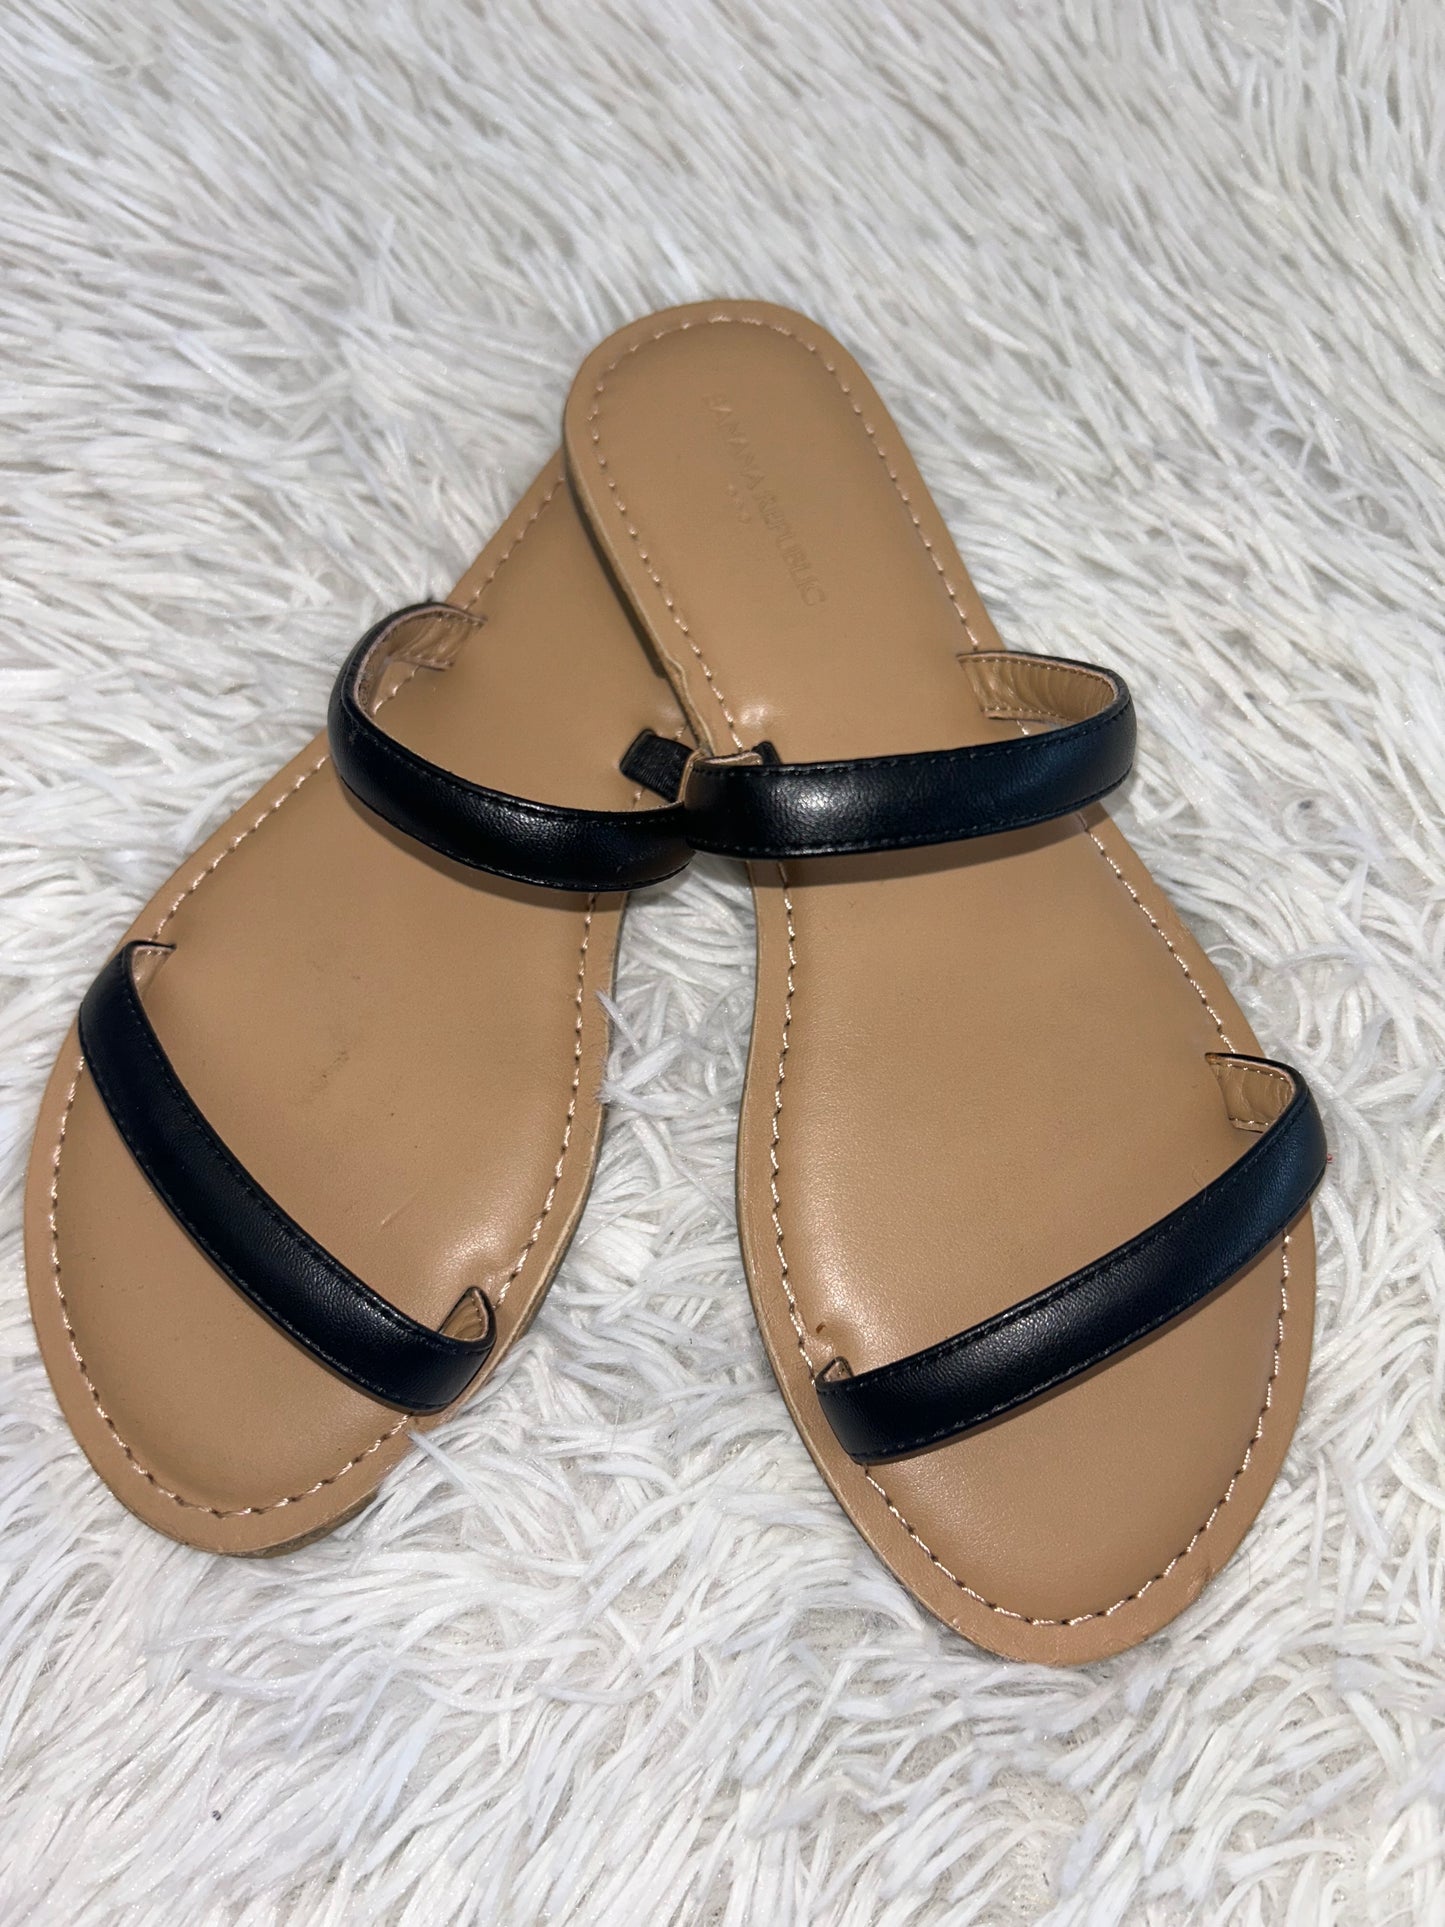 Sandals Flats By Banana Republic O  Size: 6